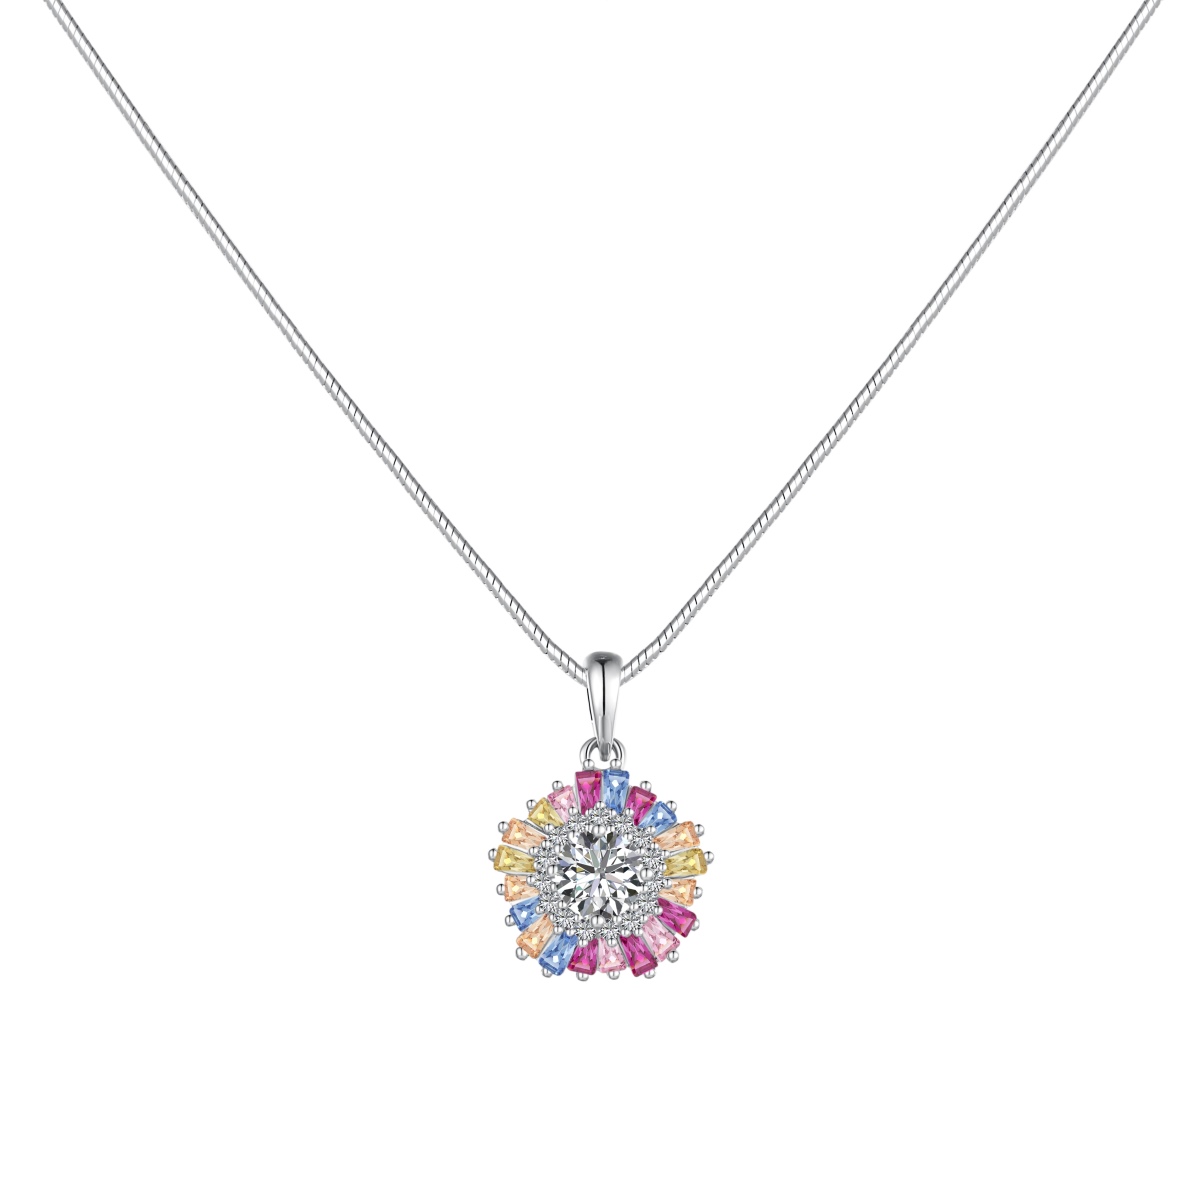 Rainbow Sunflower Pendant Sterling Silver Necklace